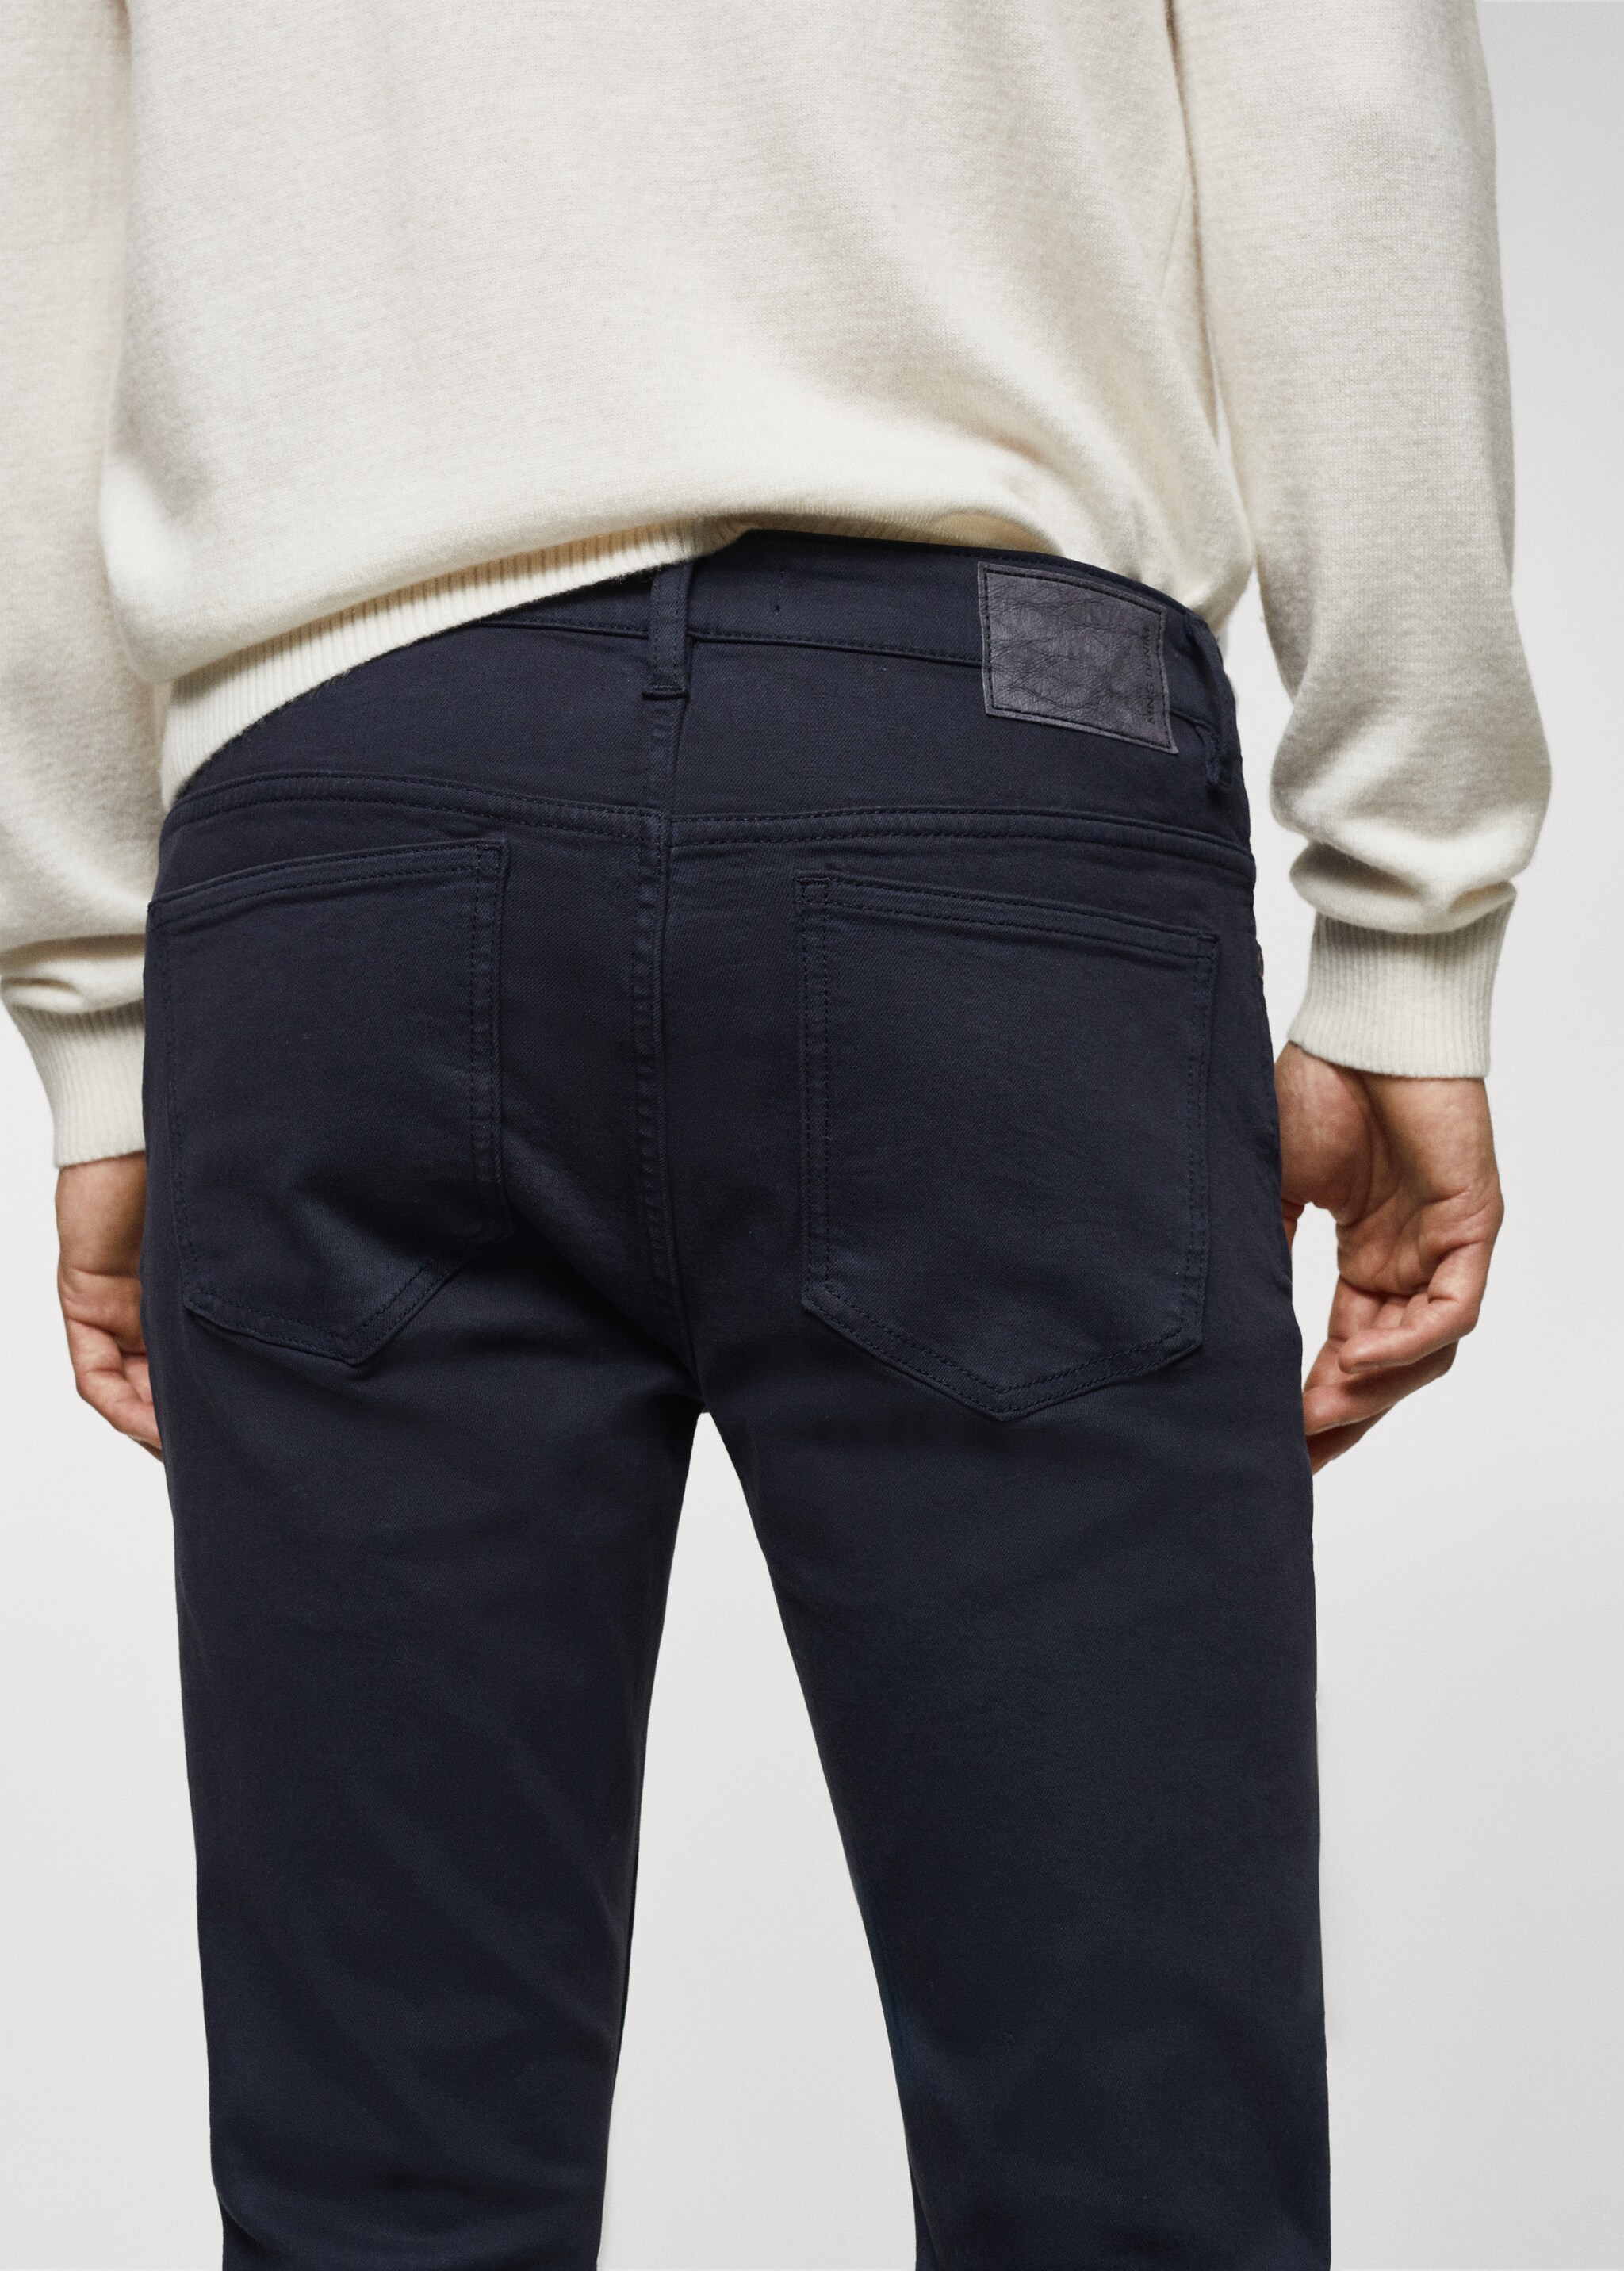 Billy skinny jeans - Details of the article 4